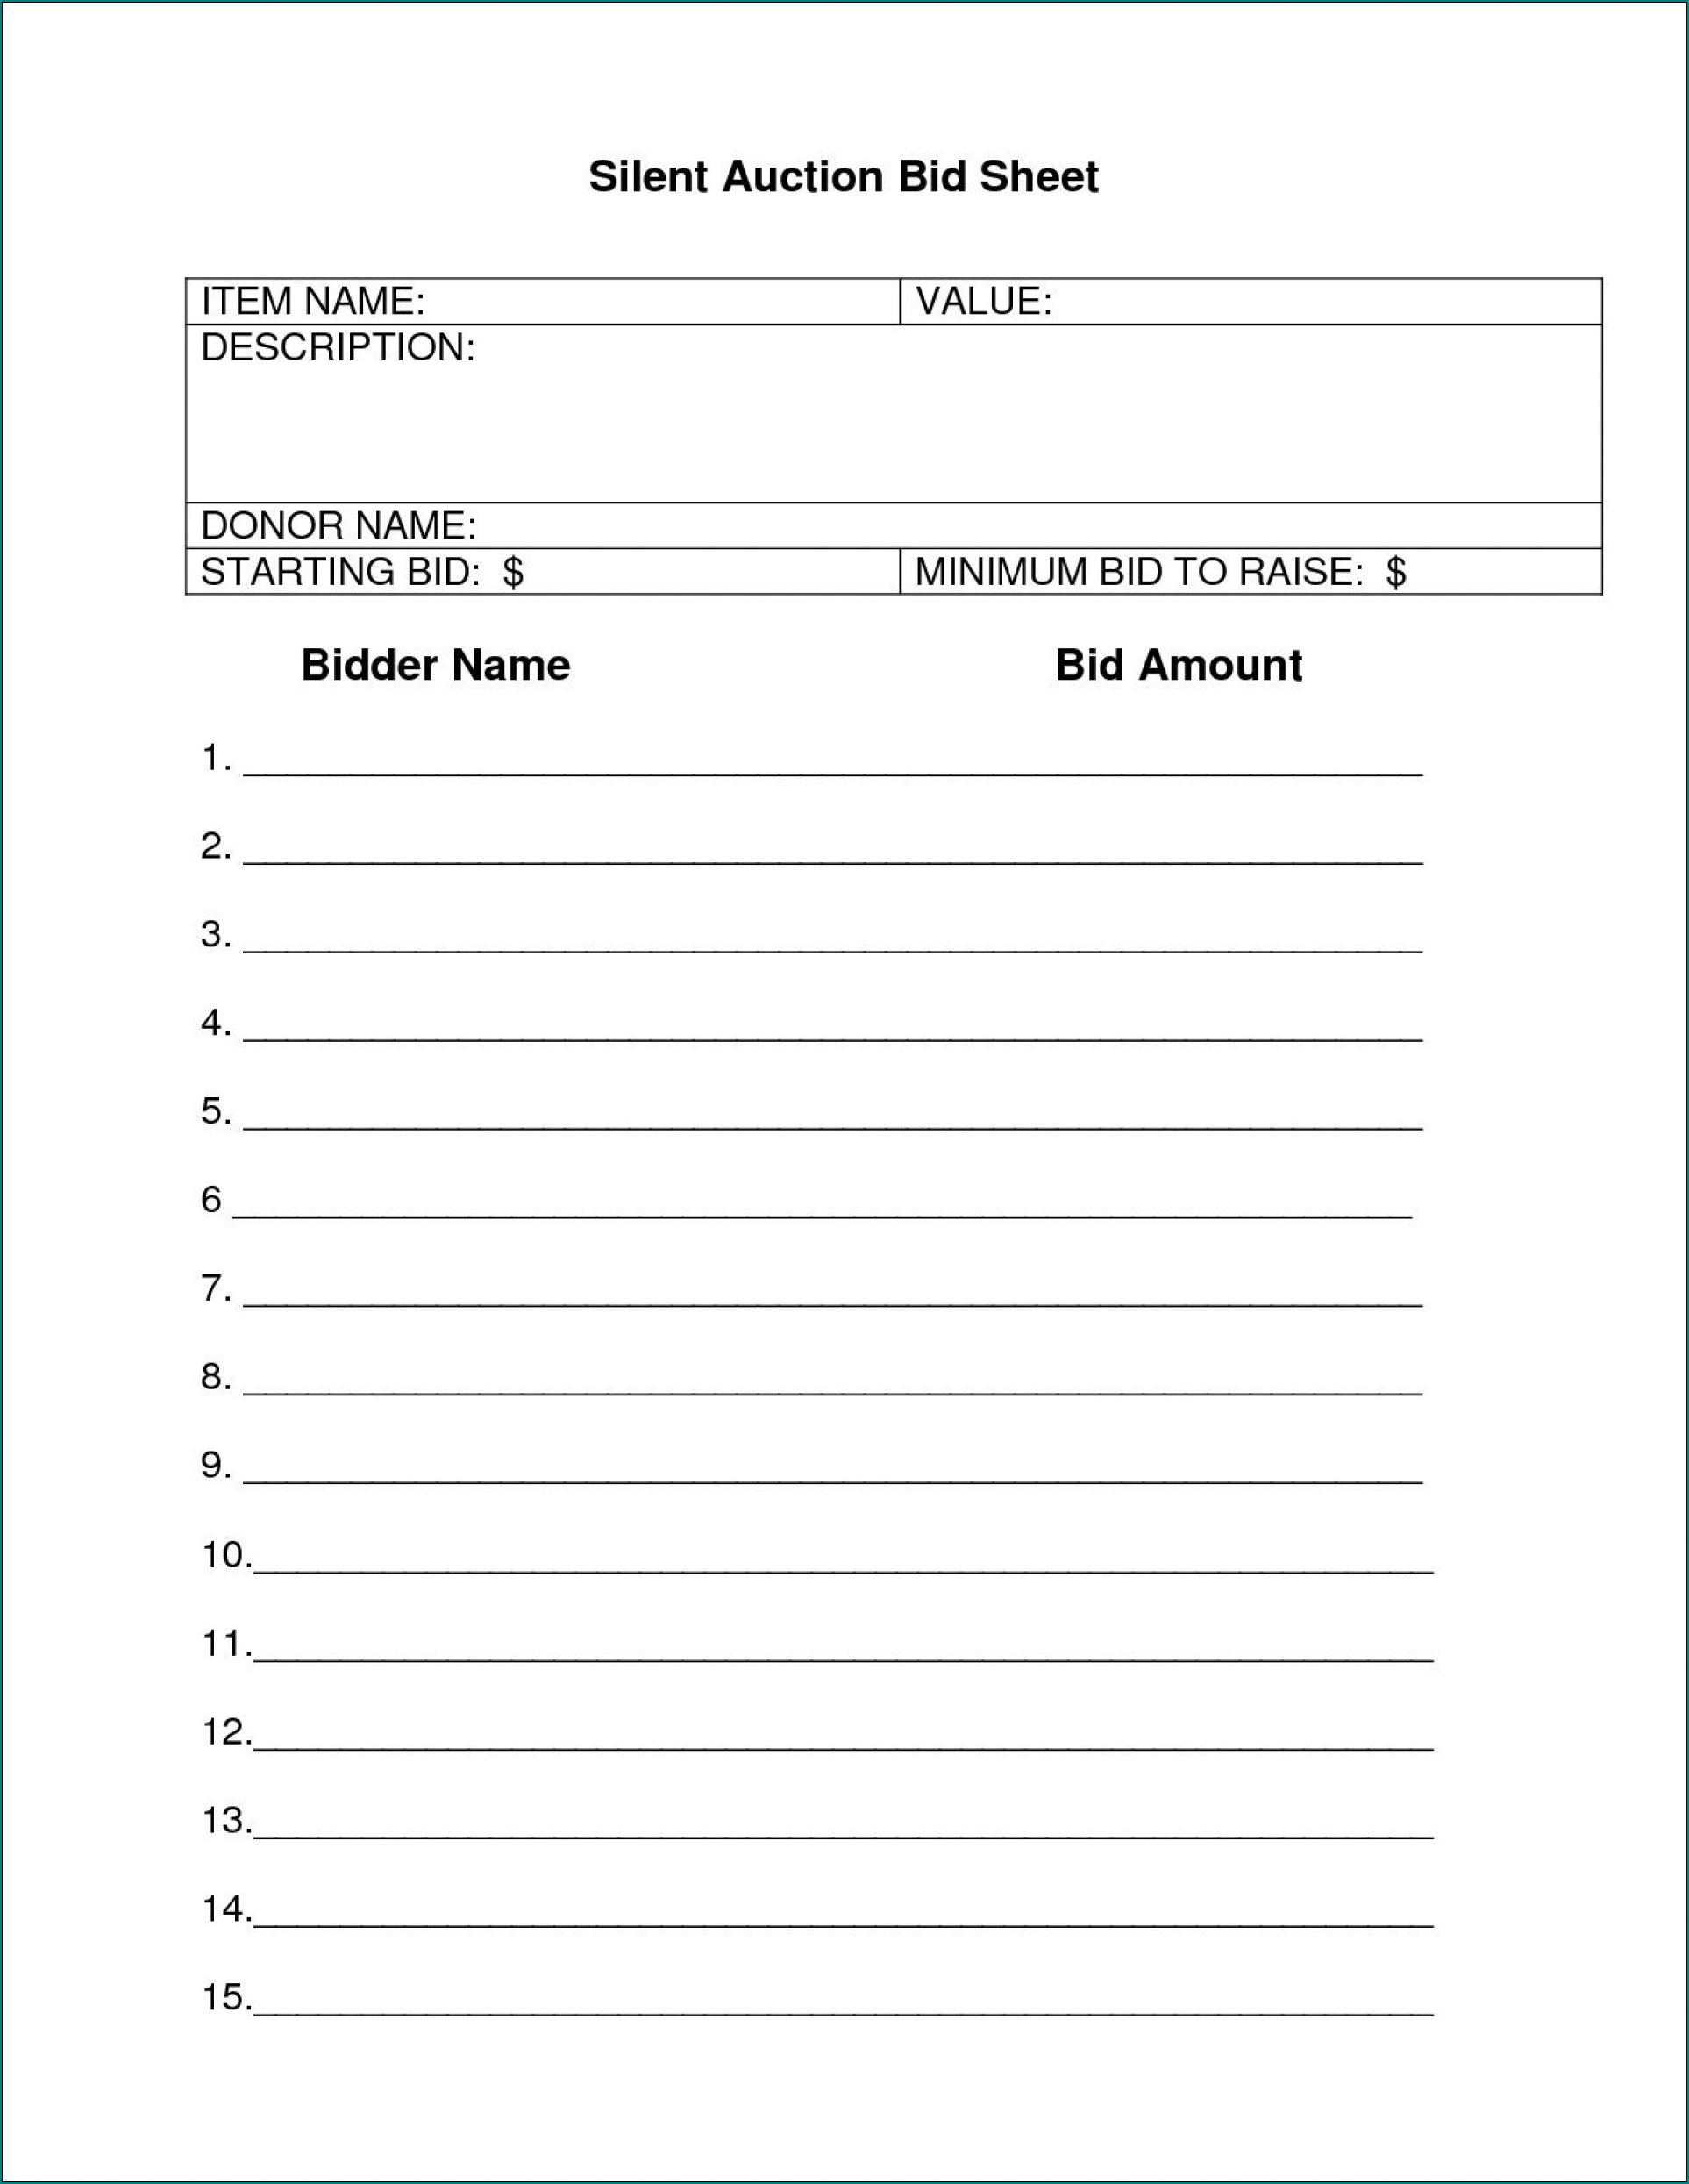 Example of Silent Auction Bid Sheet Template